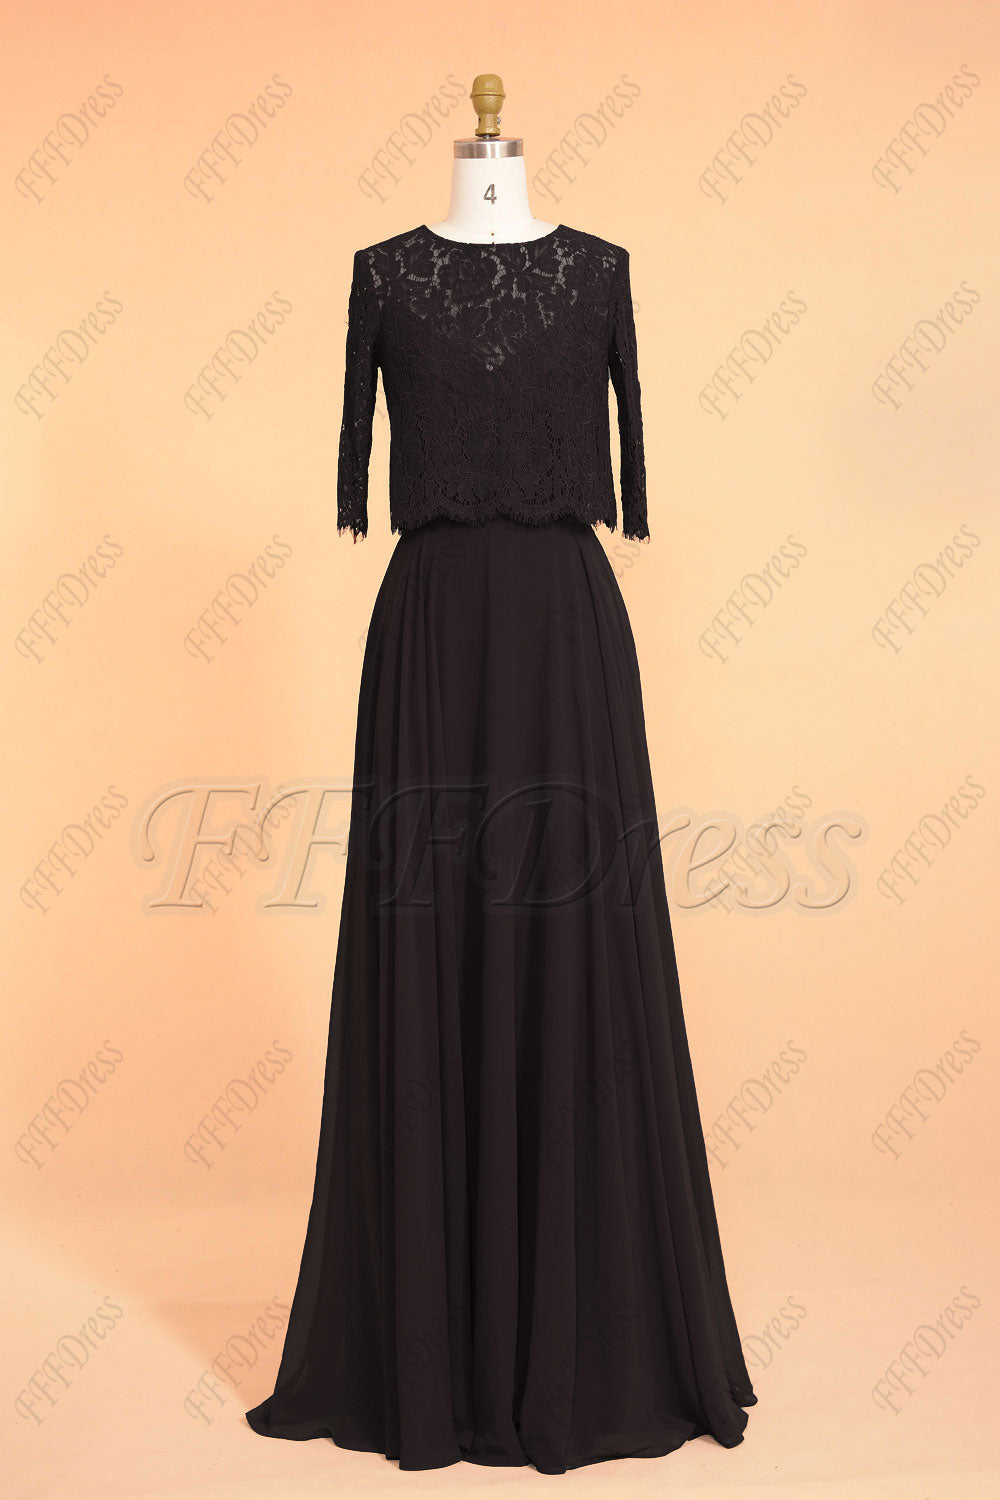 Black modest formal evening dresses with sleeves lace bolero